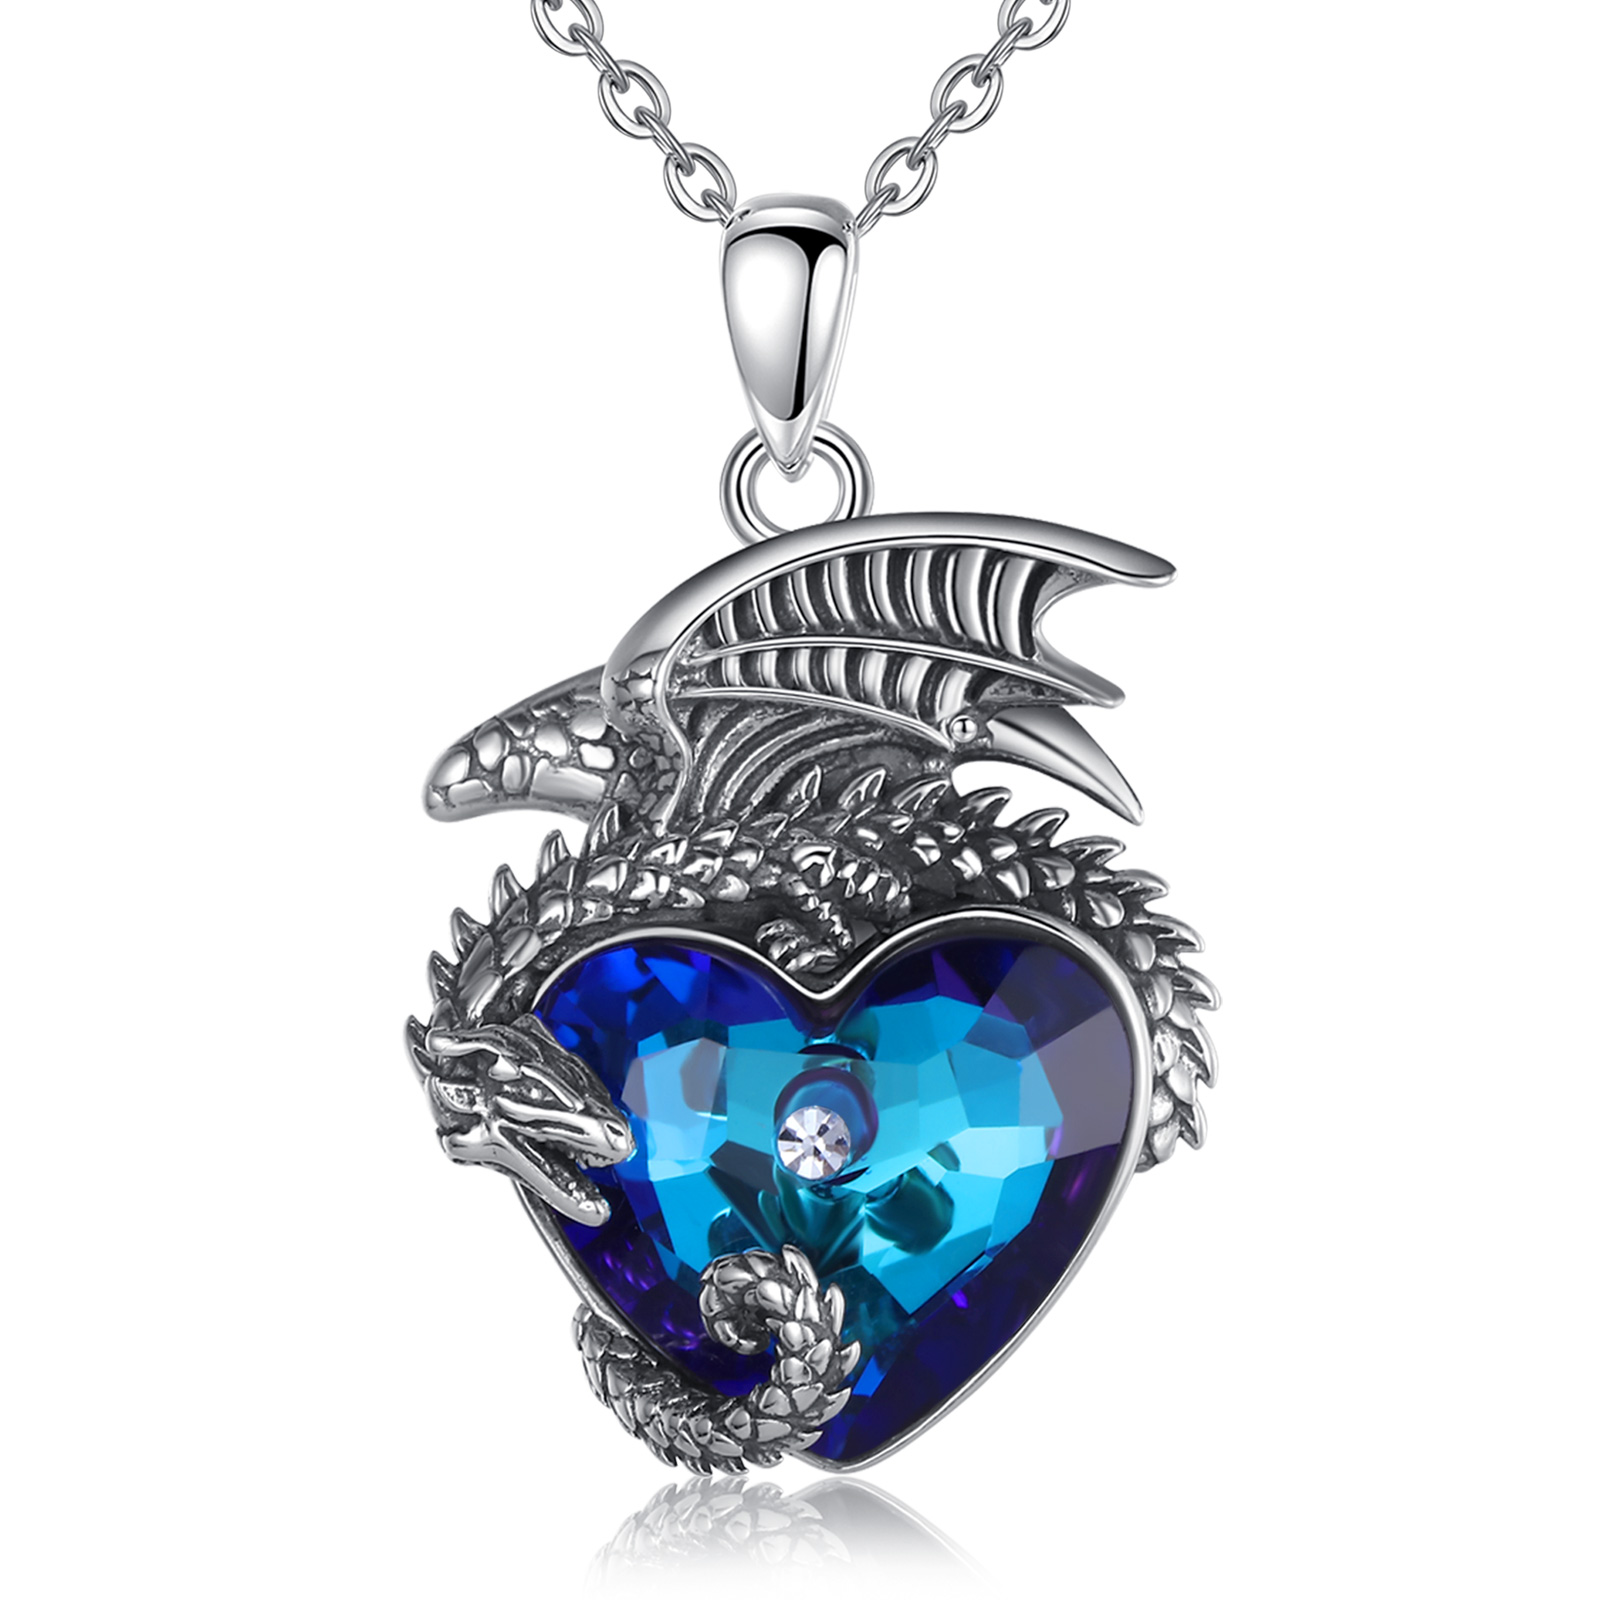 Merryshine 925 sterling silver fly dragon love heart shaped crystal jewelry pendant necklace